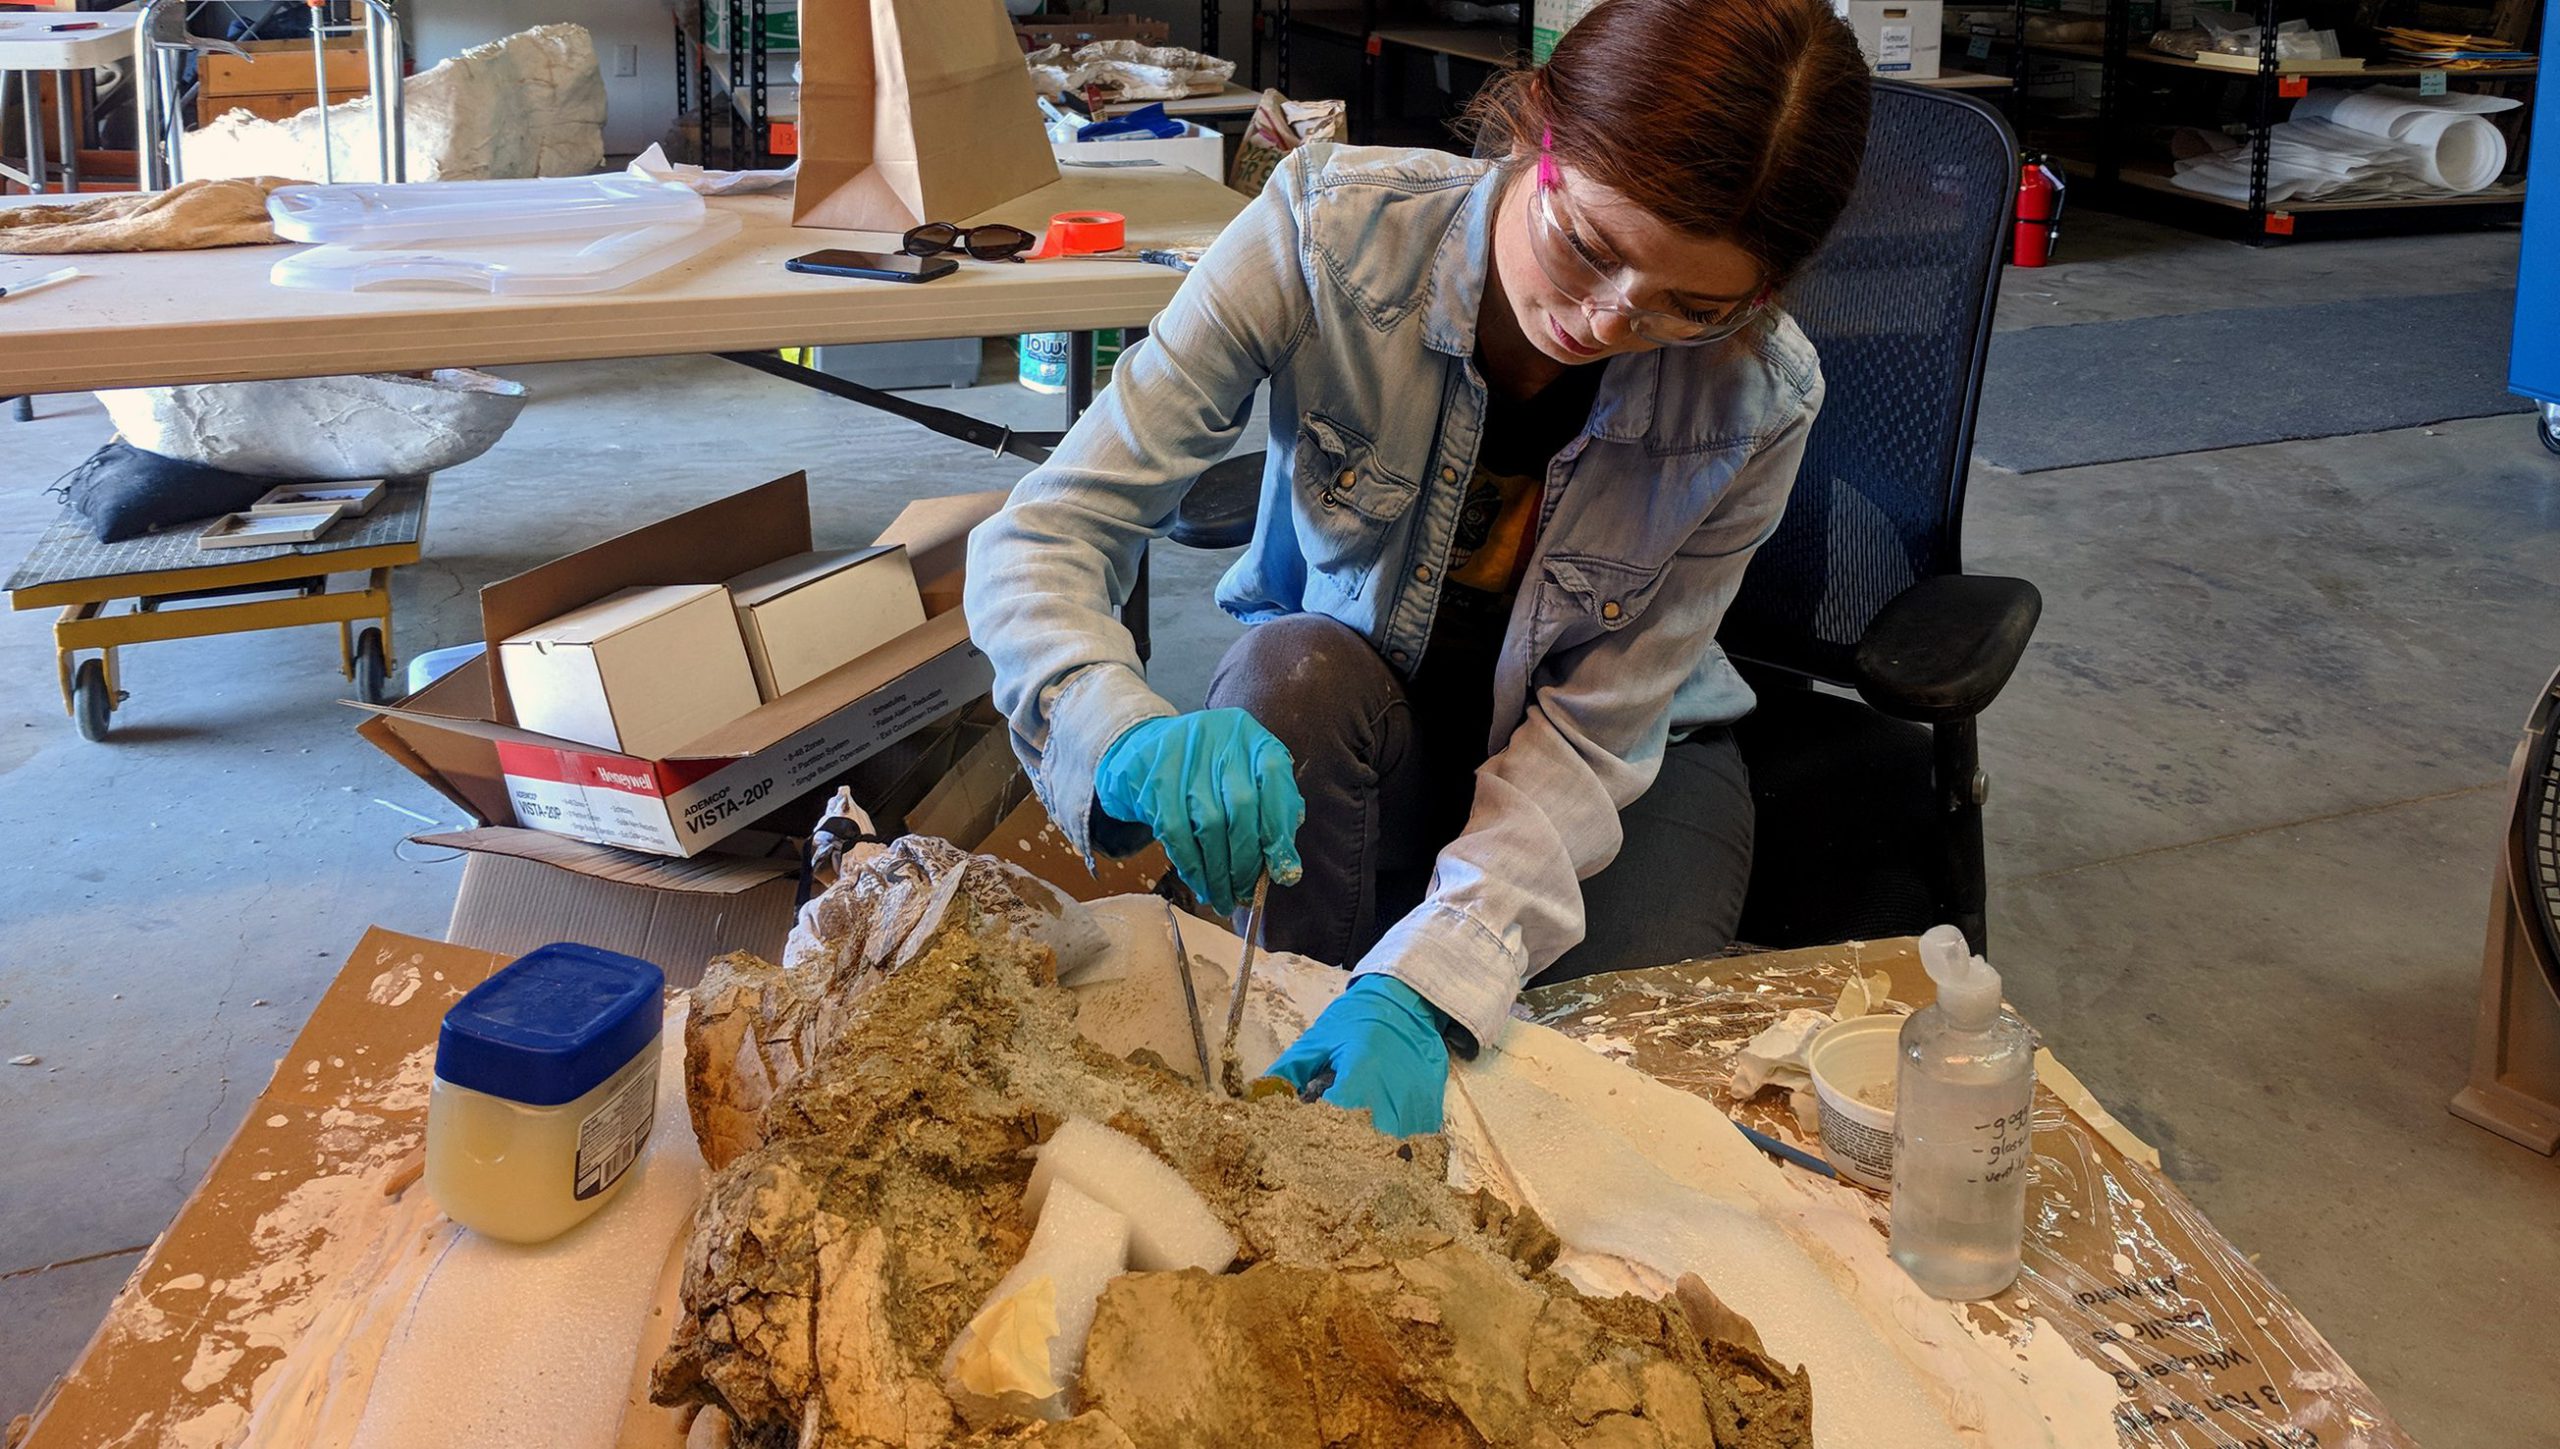 An archeologist cleans and examines a mammoth skull.